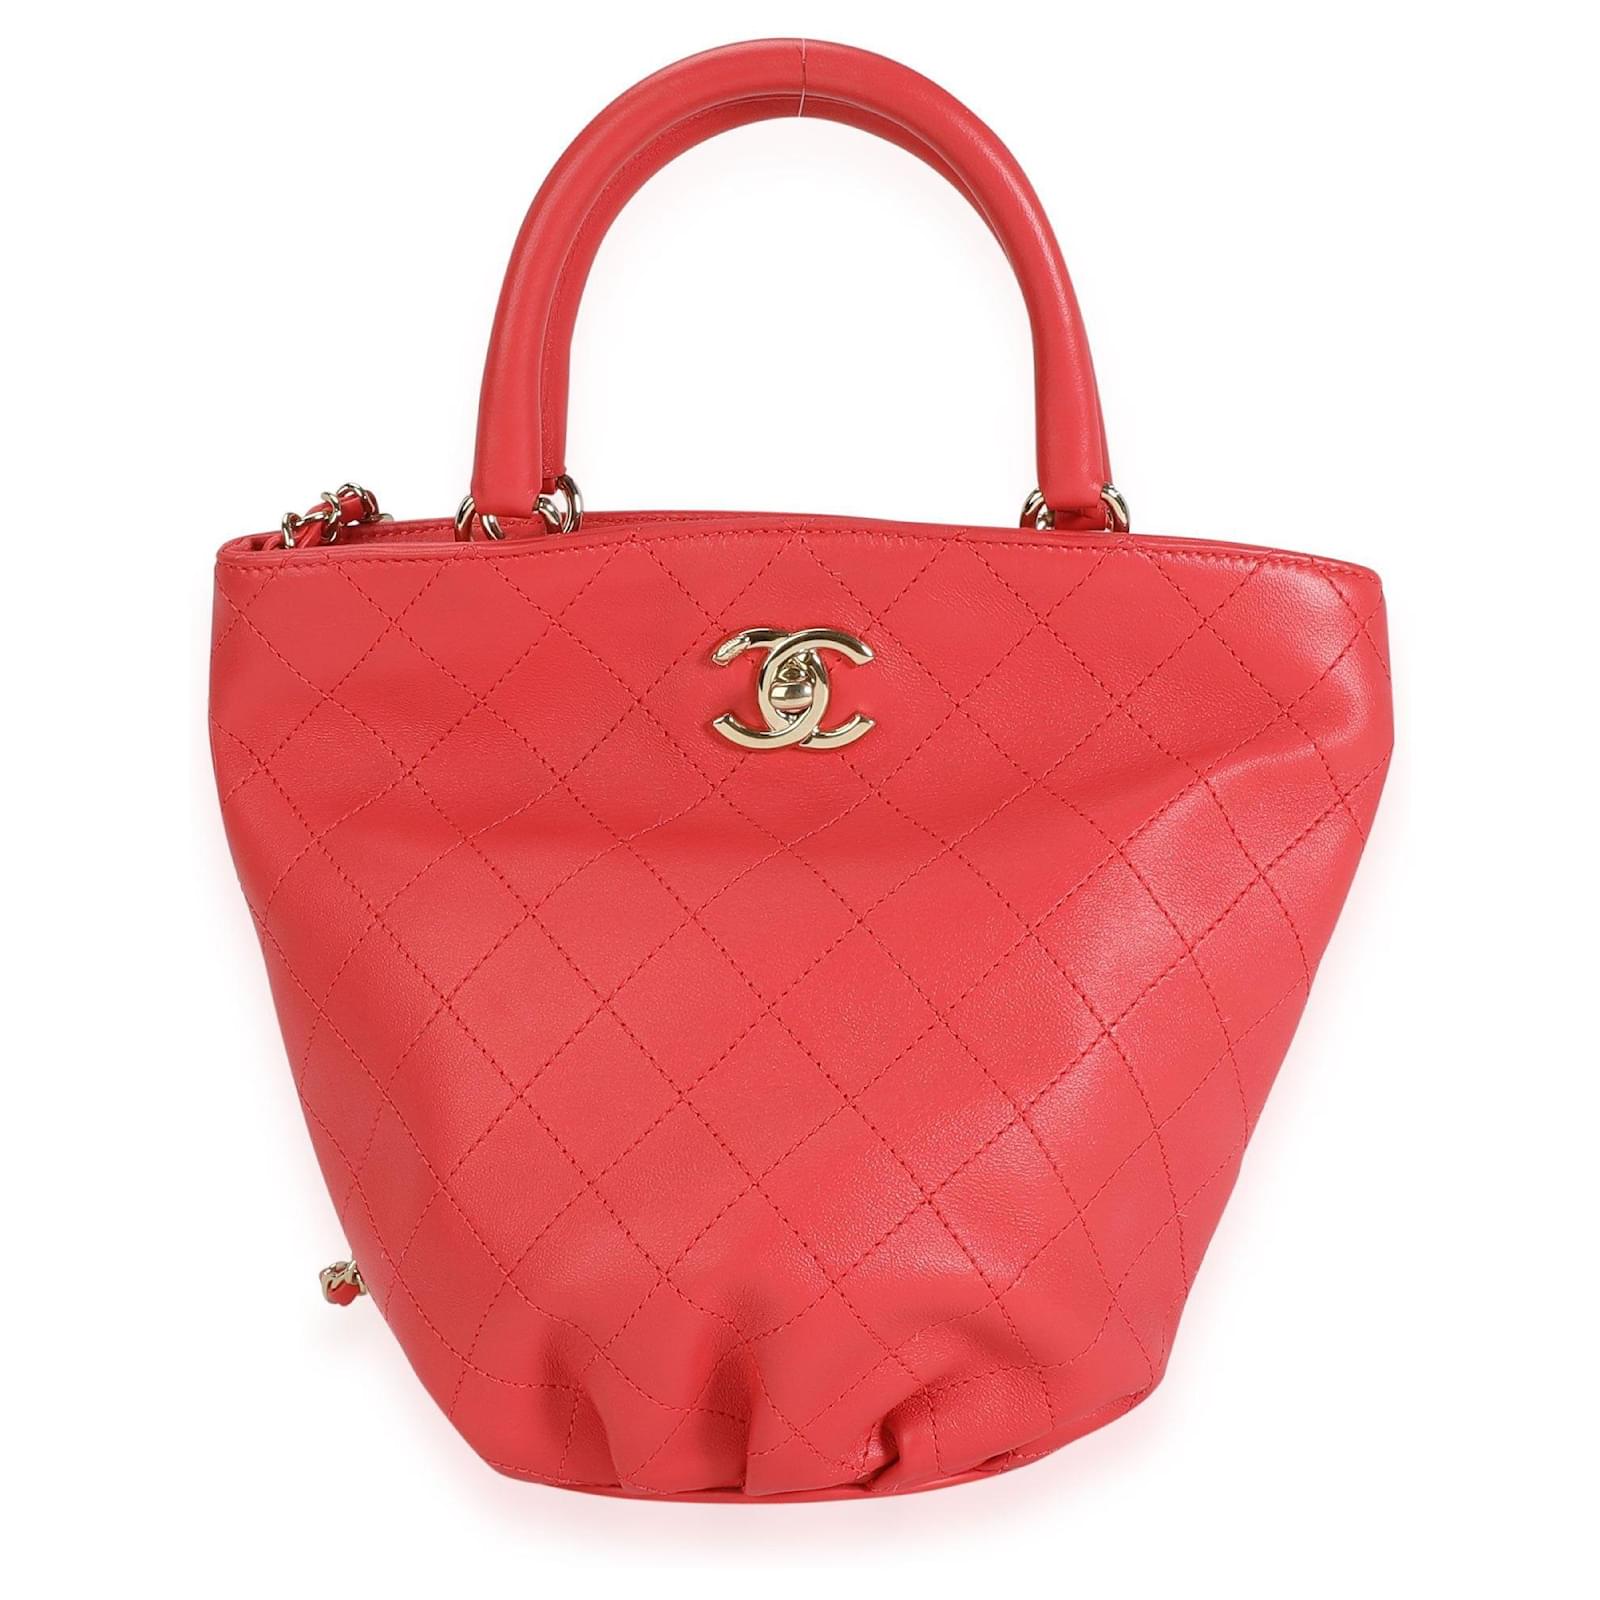 Chanel Coral Quilted Calfskin Small Bucket Bag Orange Leather Pony